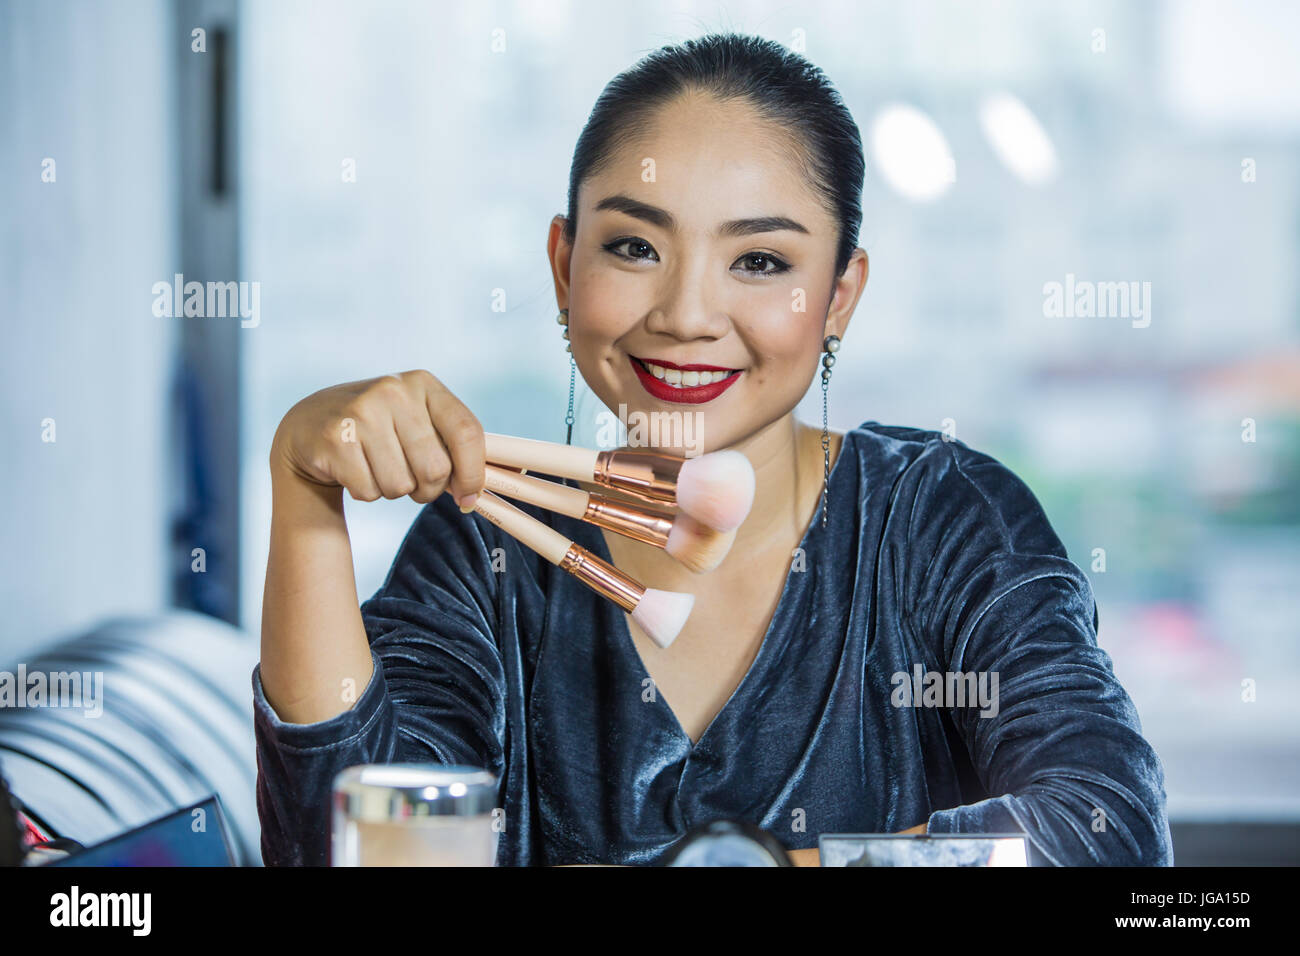 Brunette woman applying make up  closeup portrait of woman with makeup brush near face Stock Photo